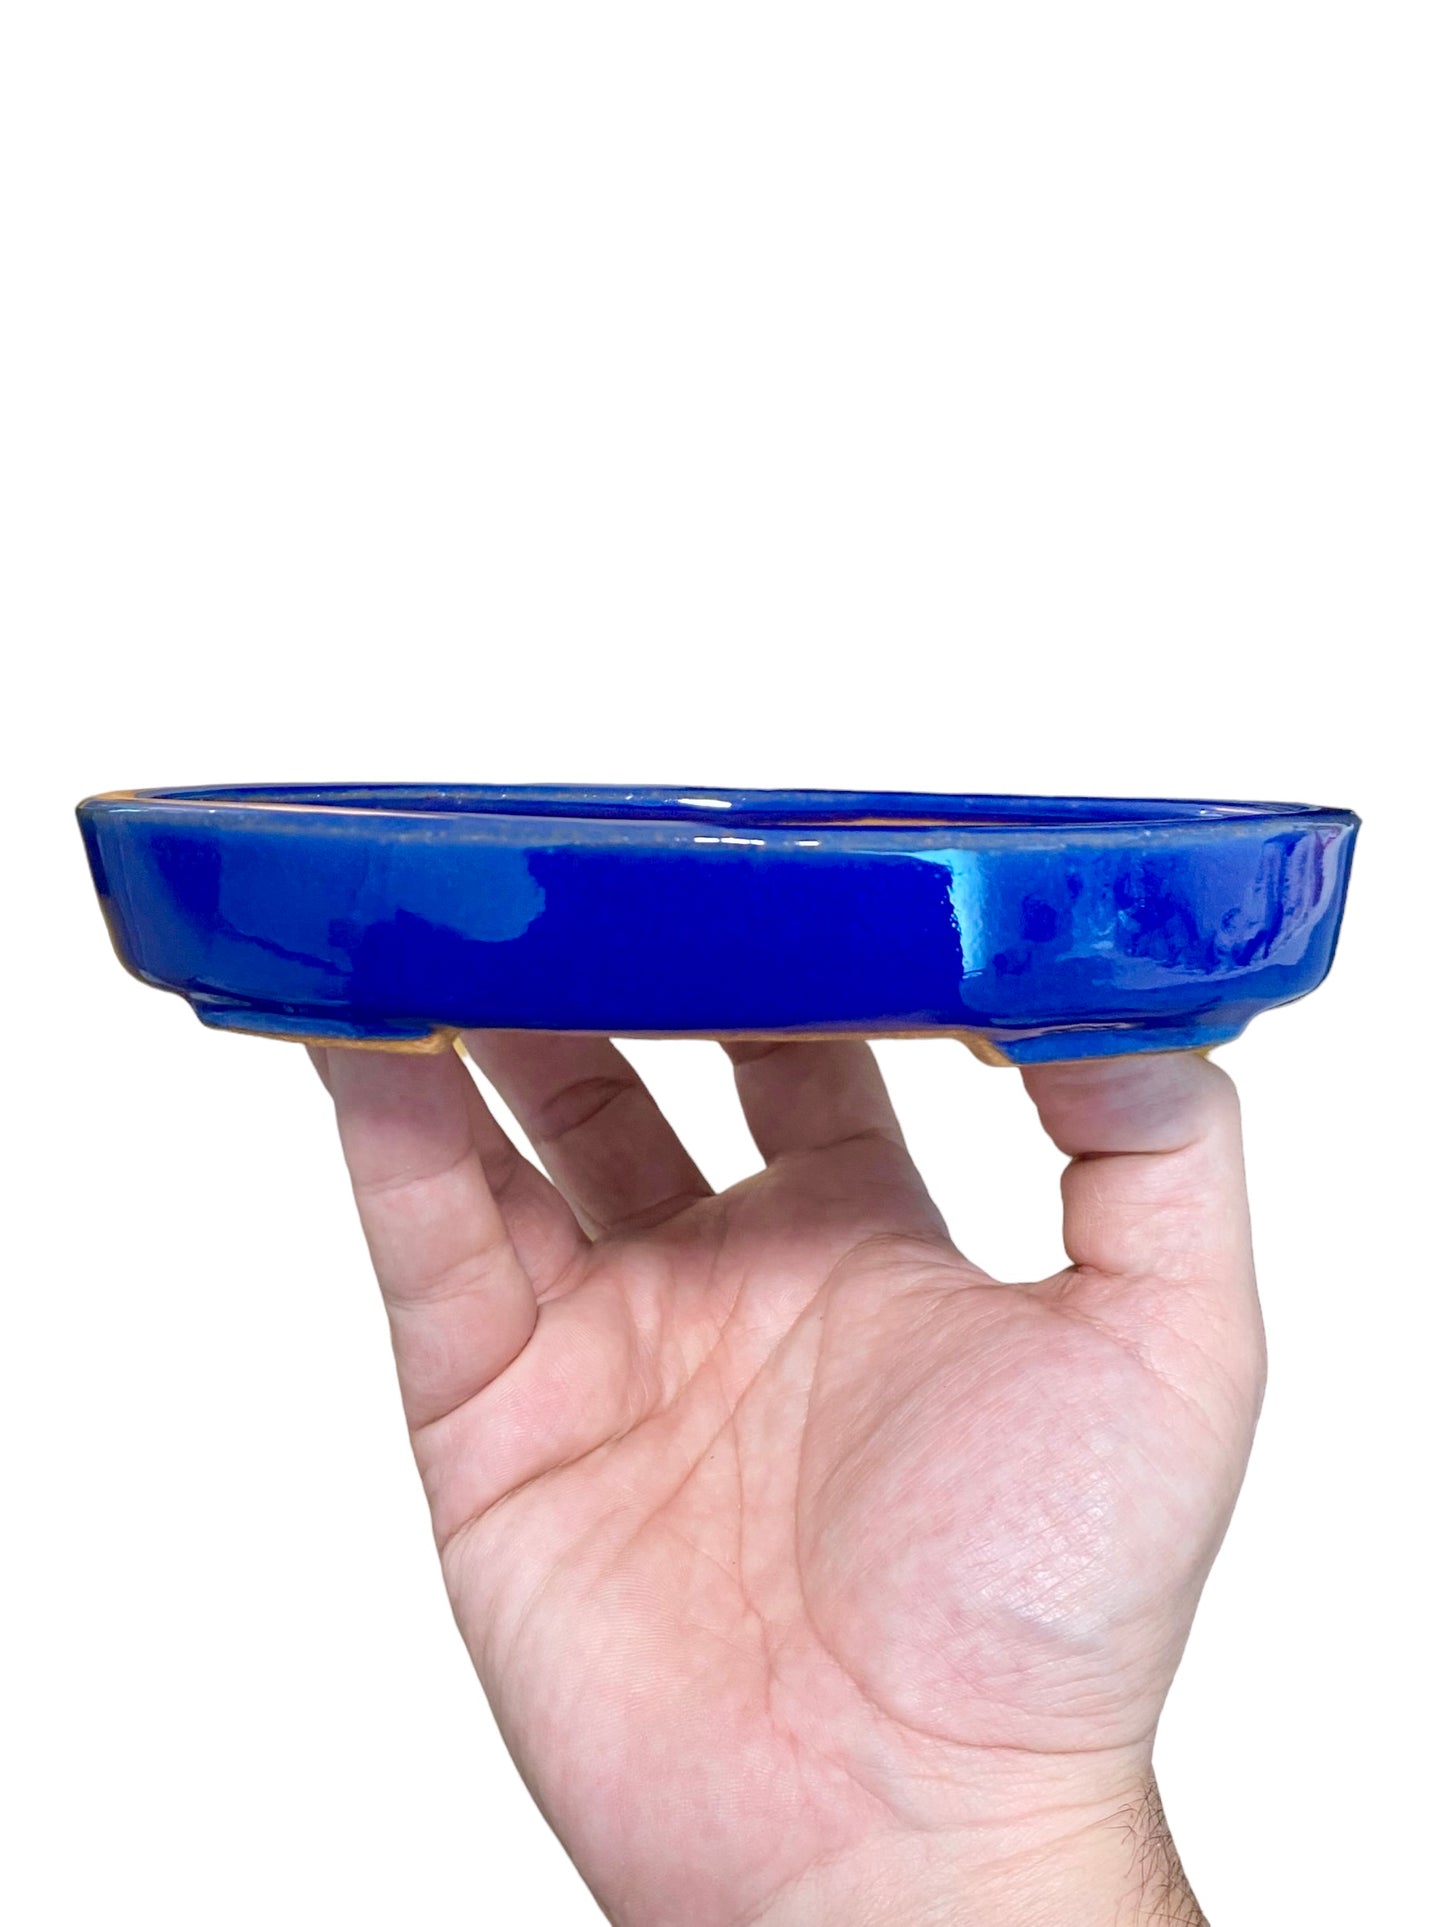 Ikko - Royal Blue Glazed Oval Bonsai or Accent Pot (6-7/8” wide)